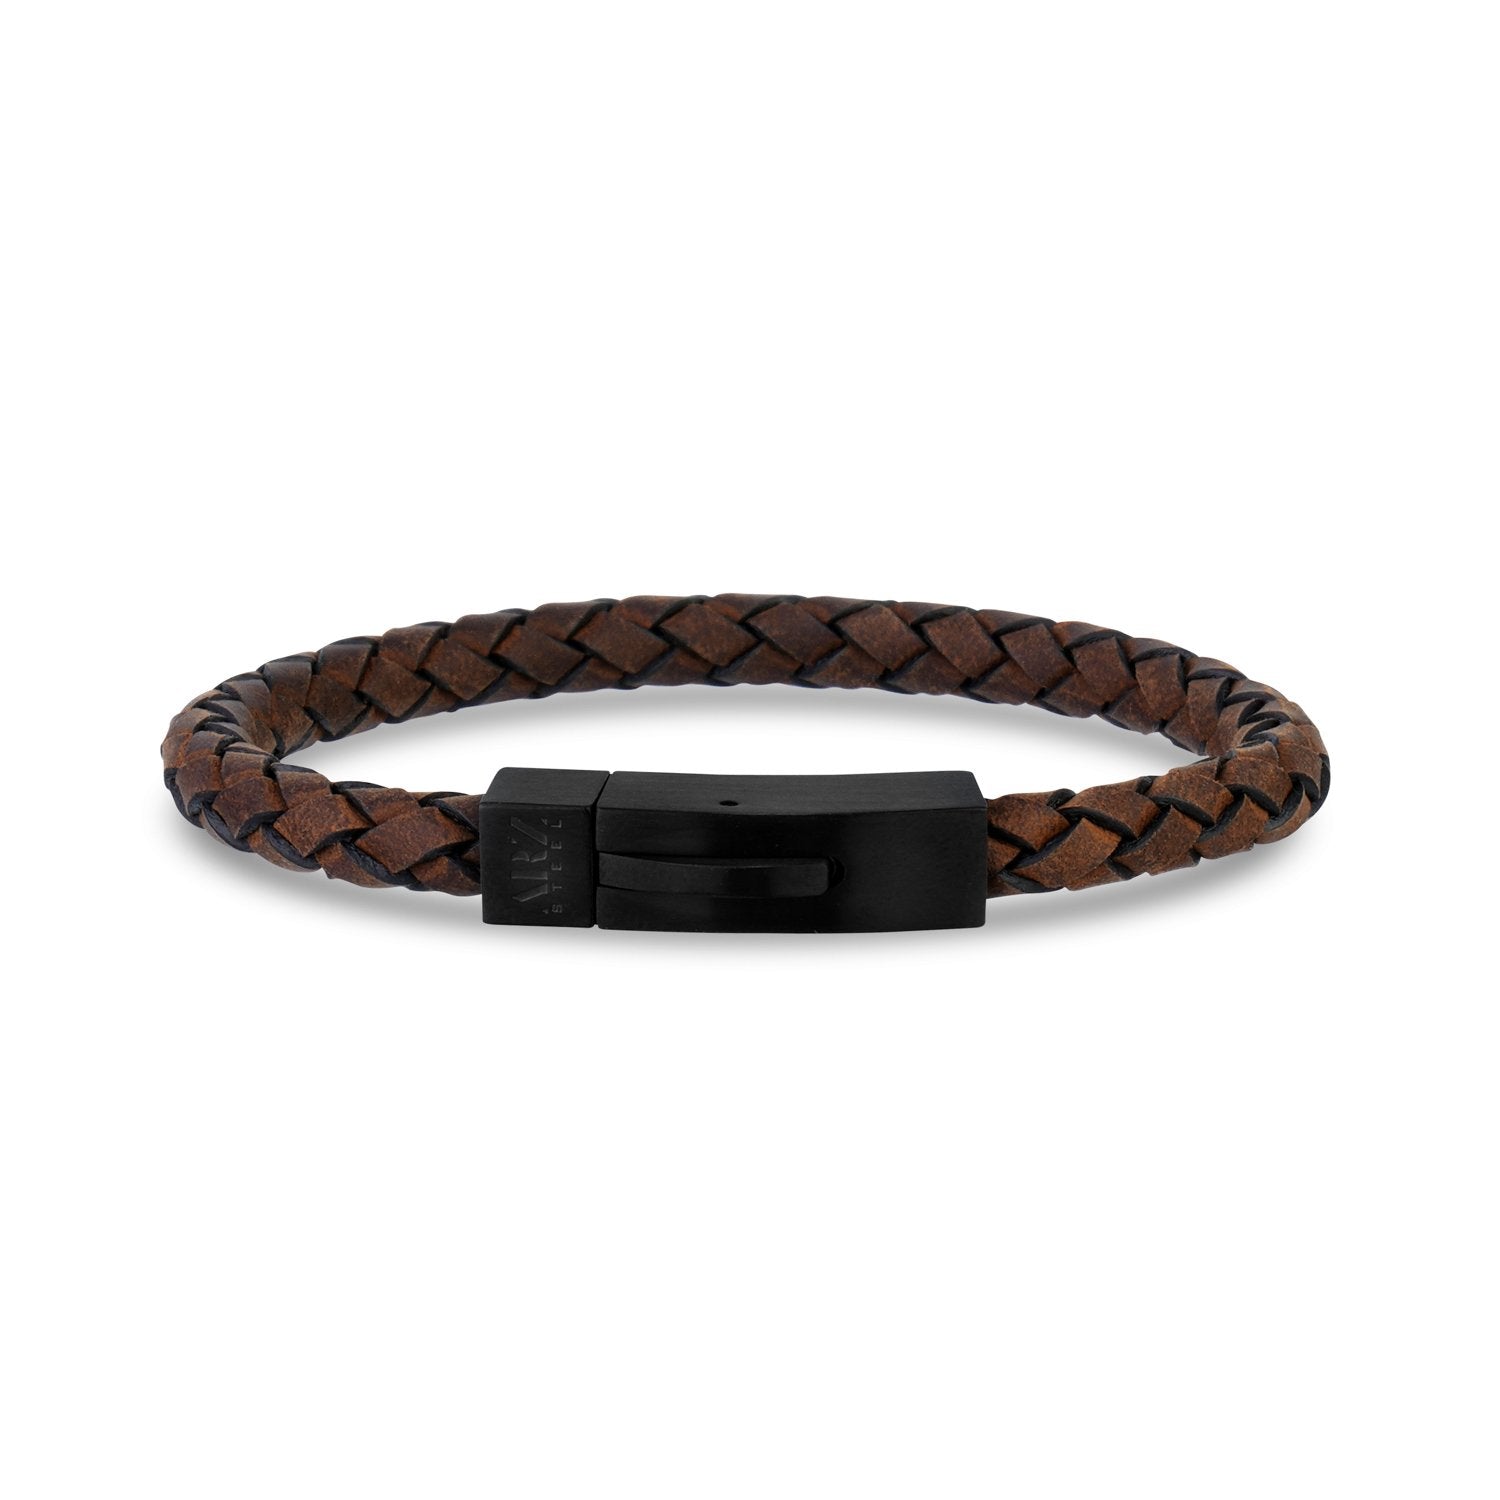 How to make a leather bracelet with magnetic clasps: | Sun Enterprises